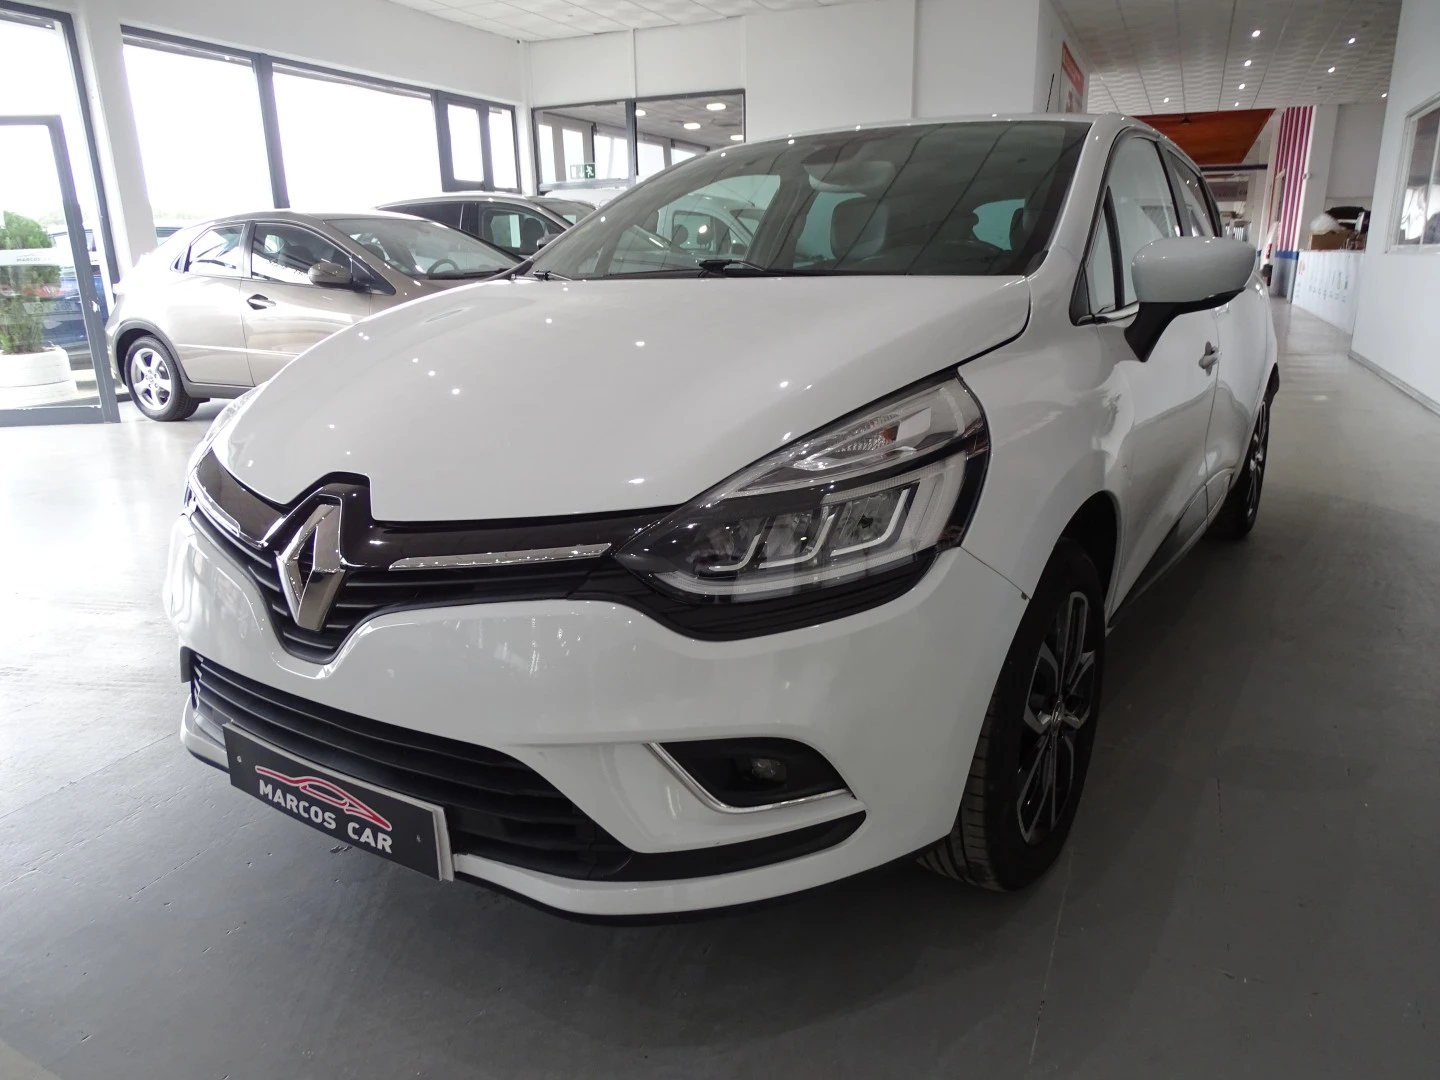 Renault Clio 1.5 dCi Luxe